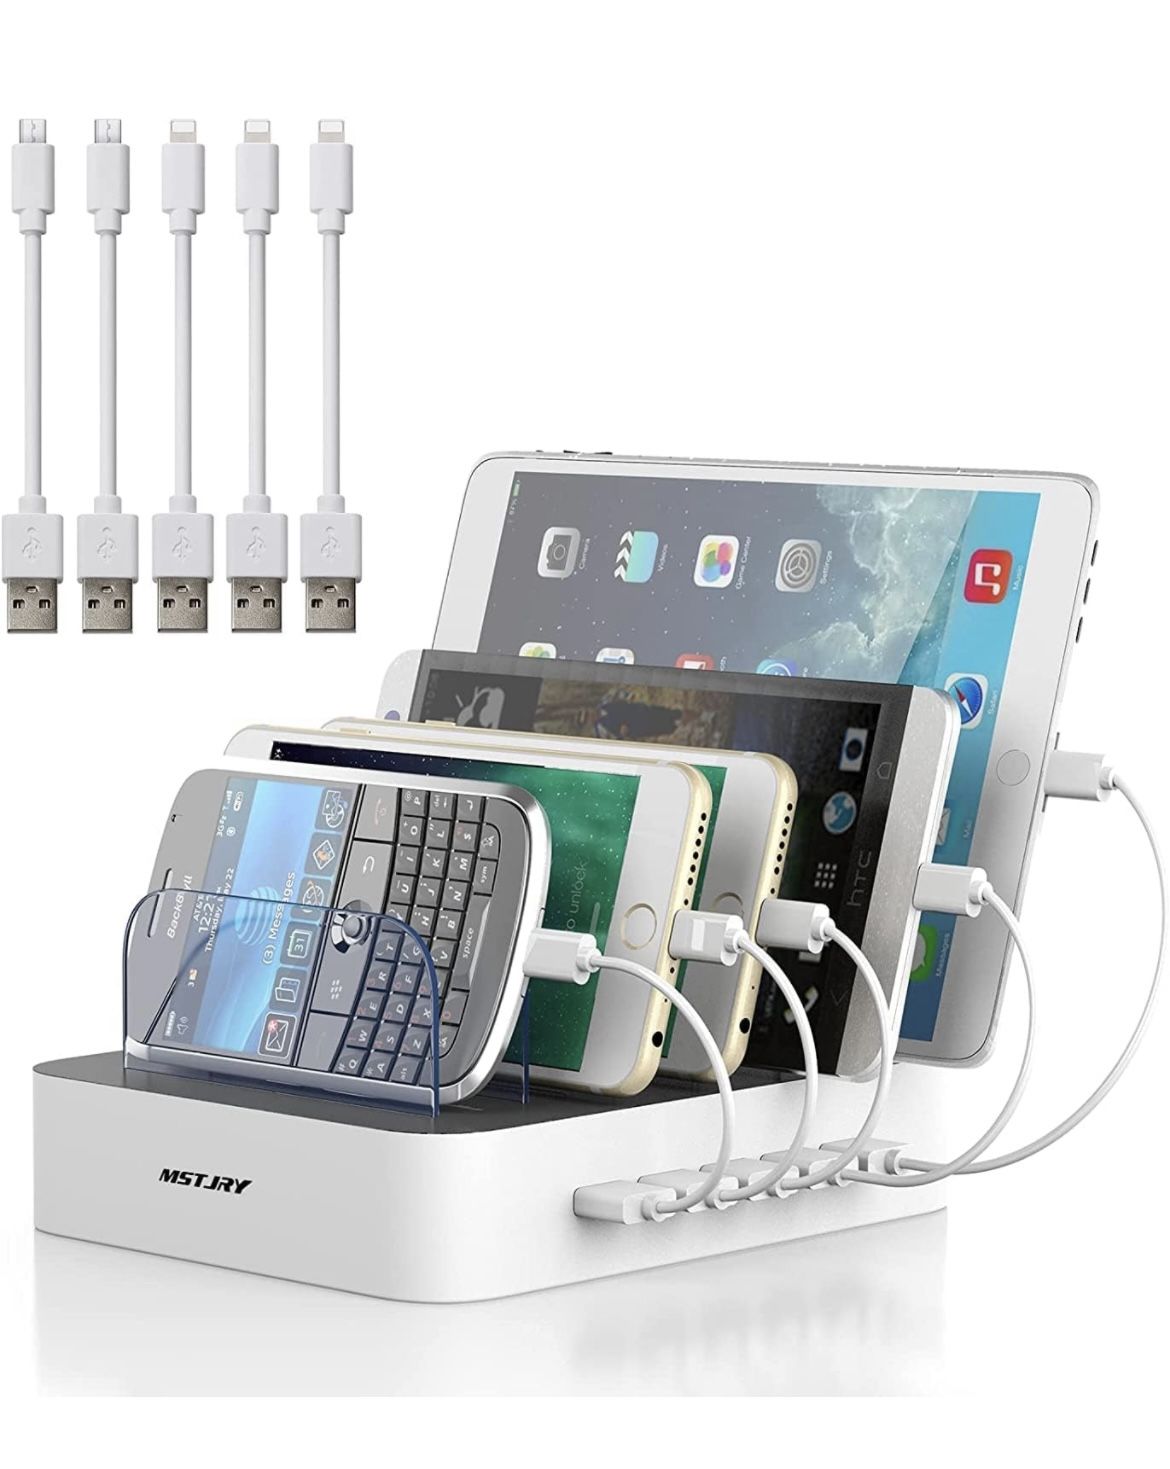 5 Port Multi USB Charger Station with Power Switch Designed for iPhone iPad Cell Phone Tablets (White, 6 Mixed Short Cables Included)